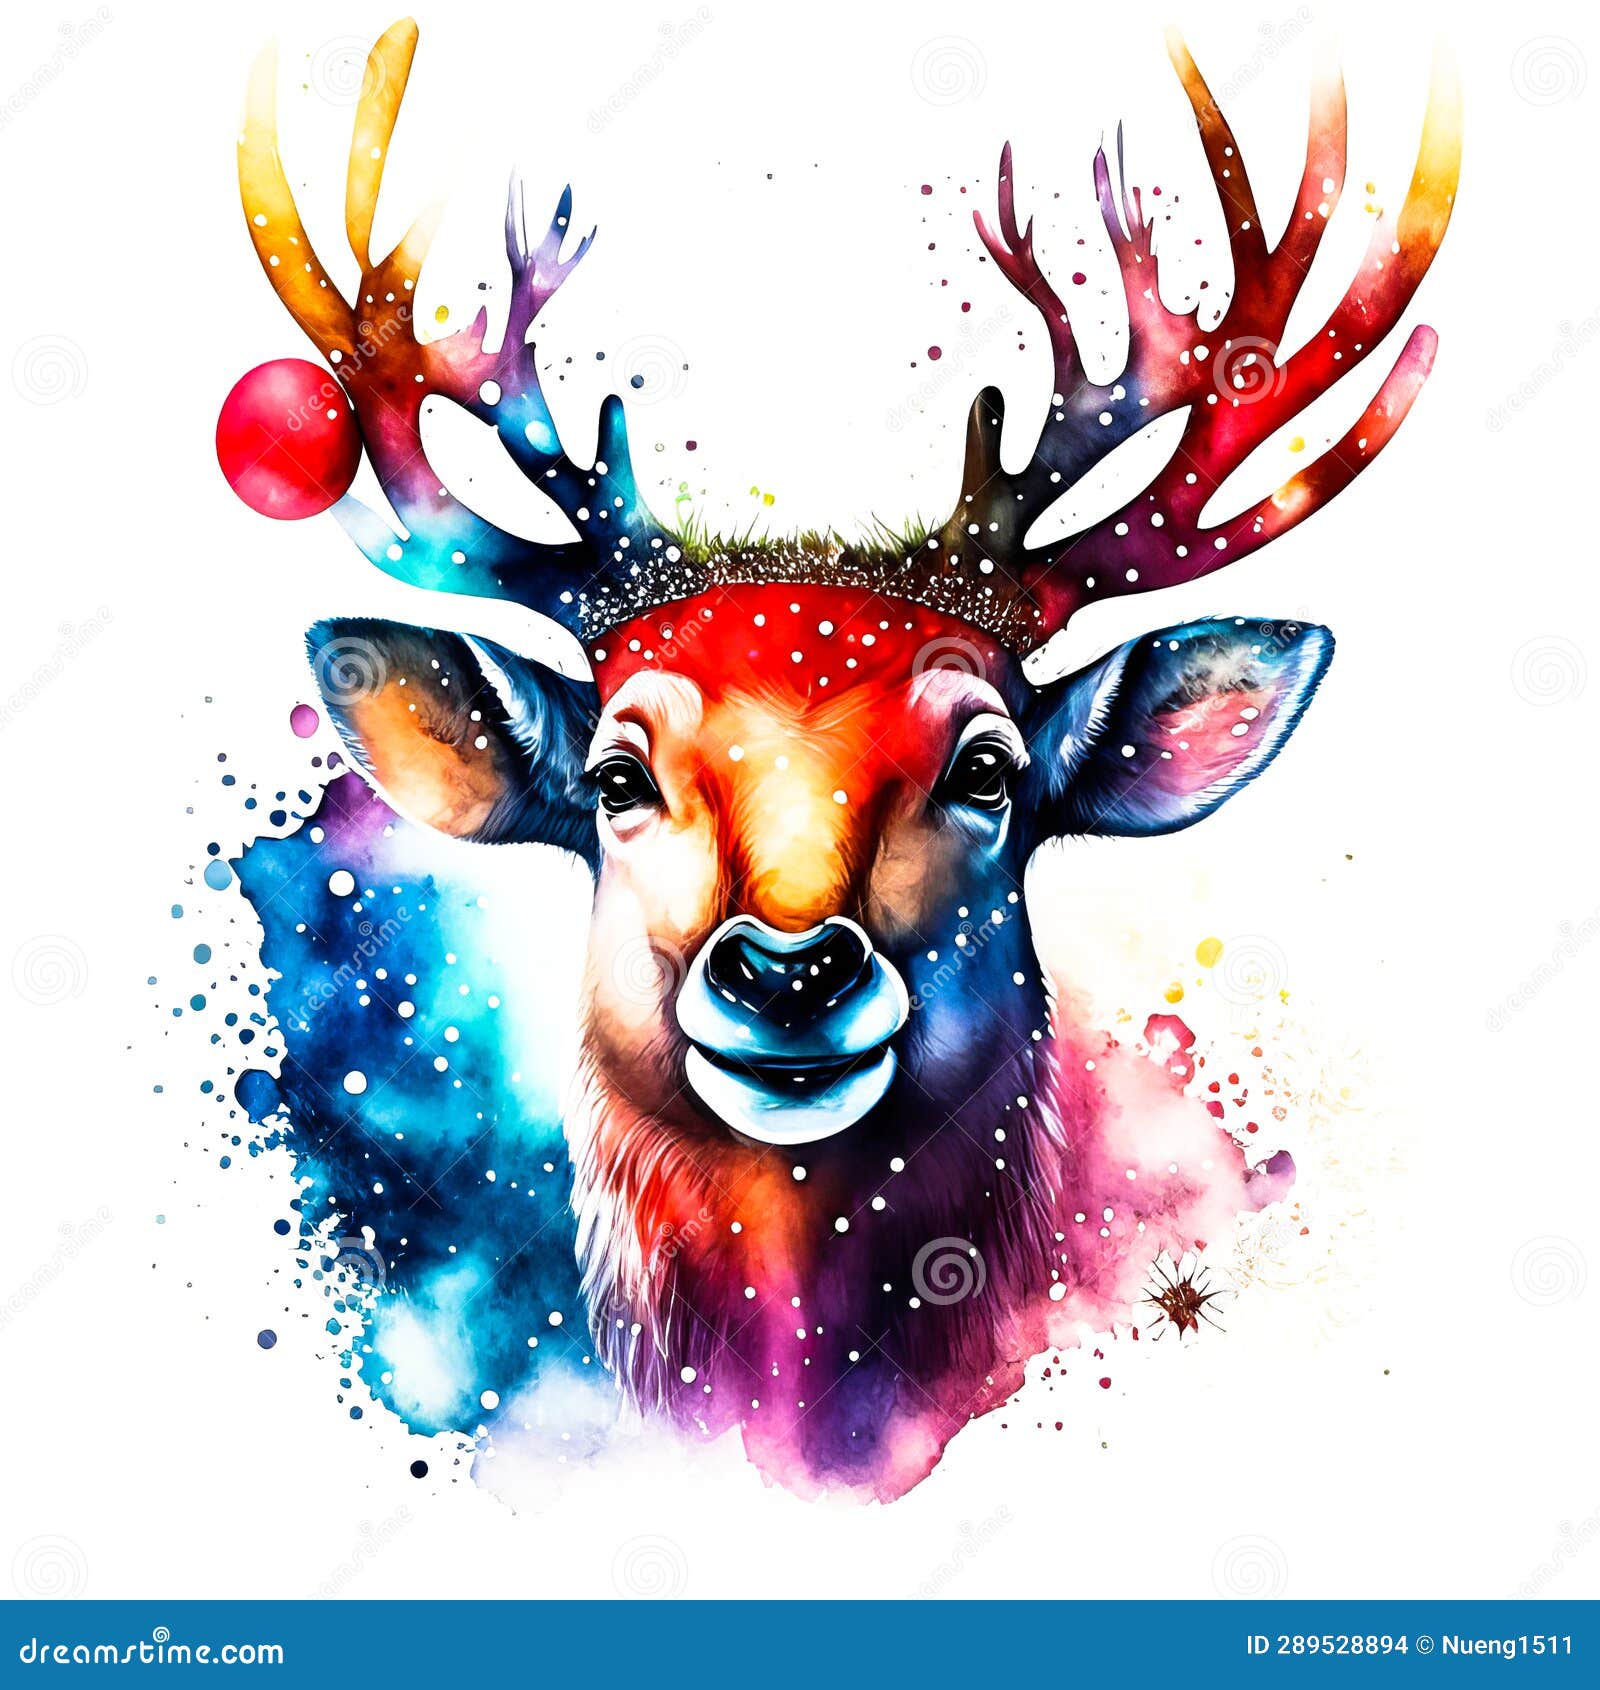 picture happiness lovely reindeer face drawing watercolor art background happiness lovely reindeer face drawing watercolor art 289528894